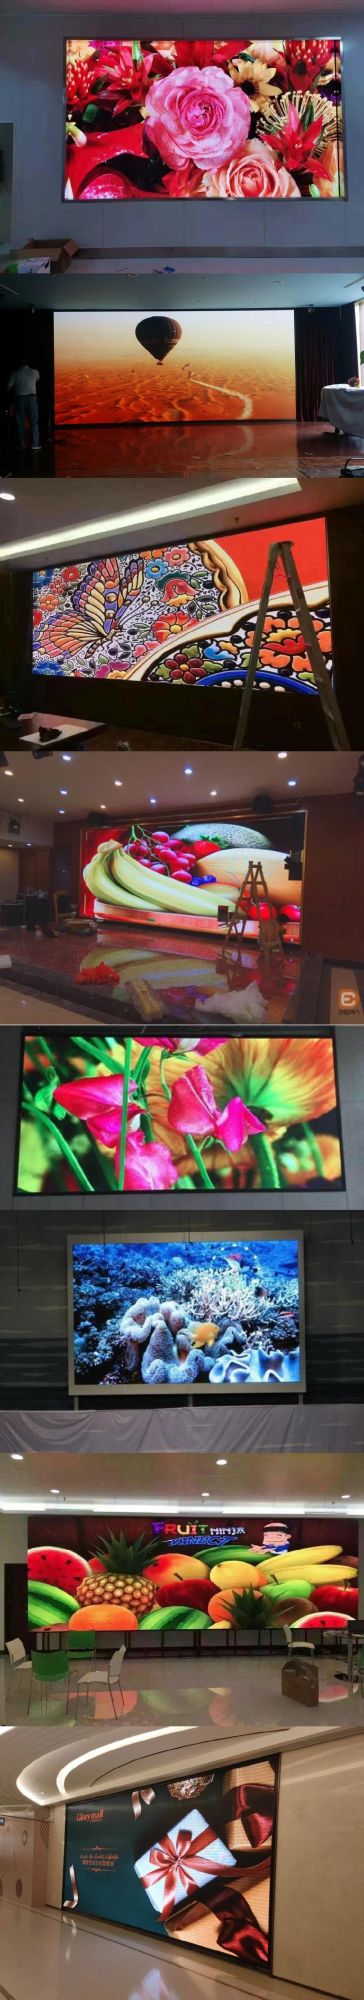 Video Fws Cardboard, Wooden Carton, Flight Case TV LED Display Screen with RoHS